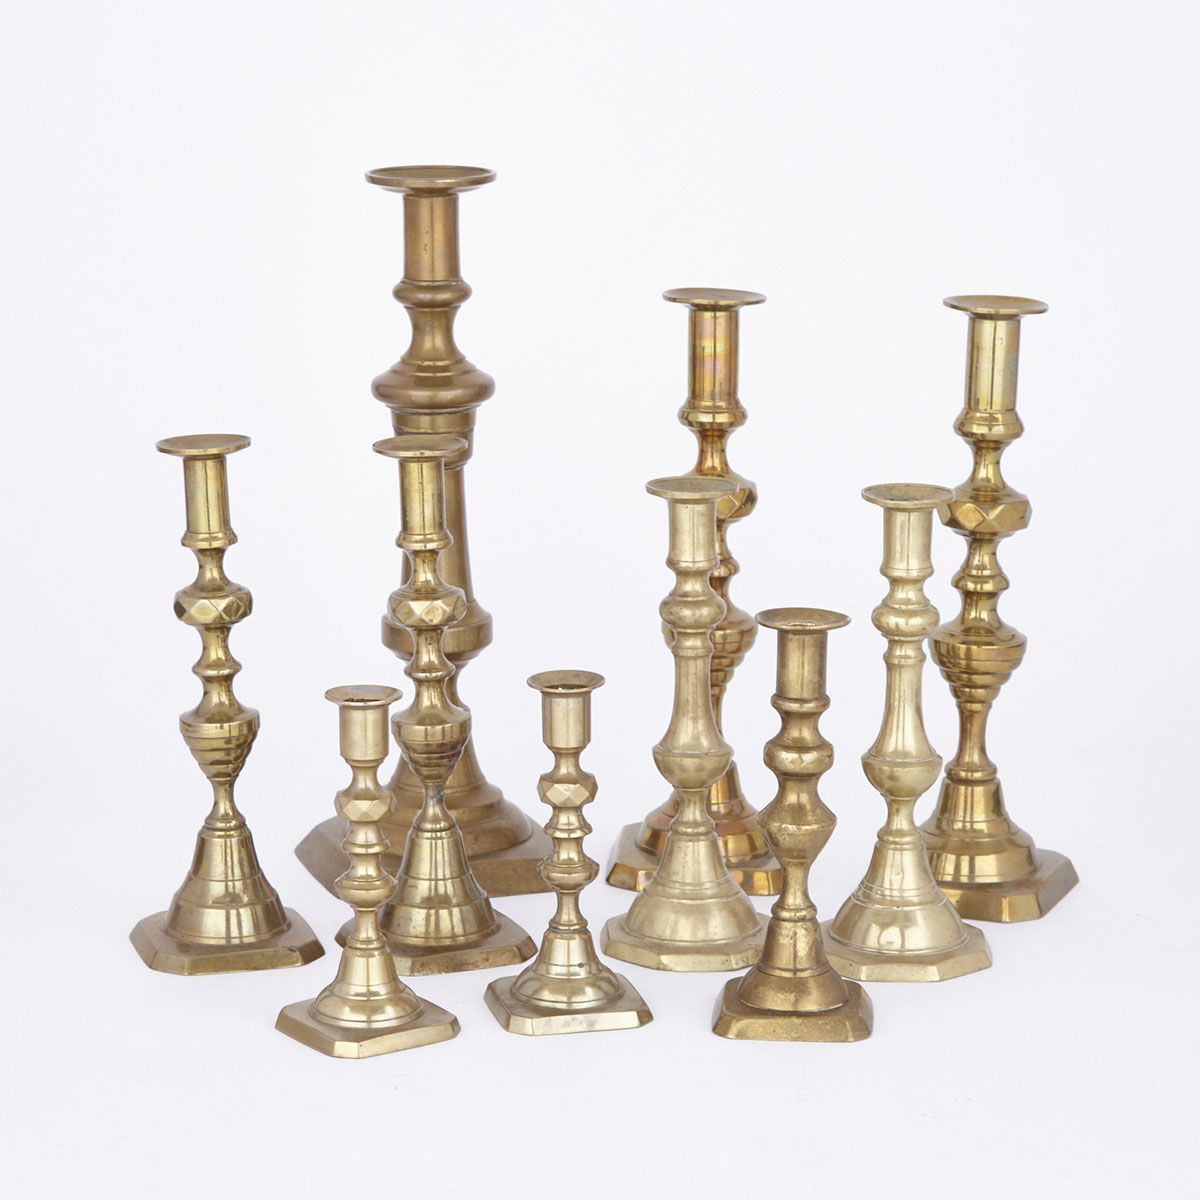 Ten English Brass Candlesticks including Four Pairs and two singles, early 19th and 20th centuries